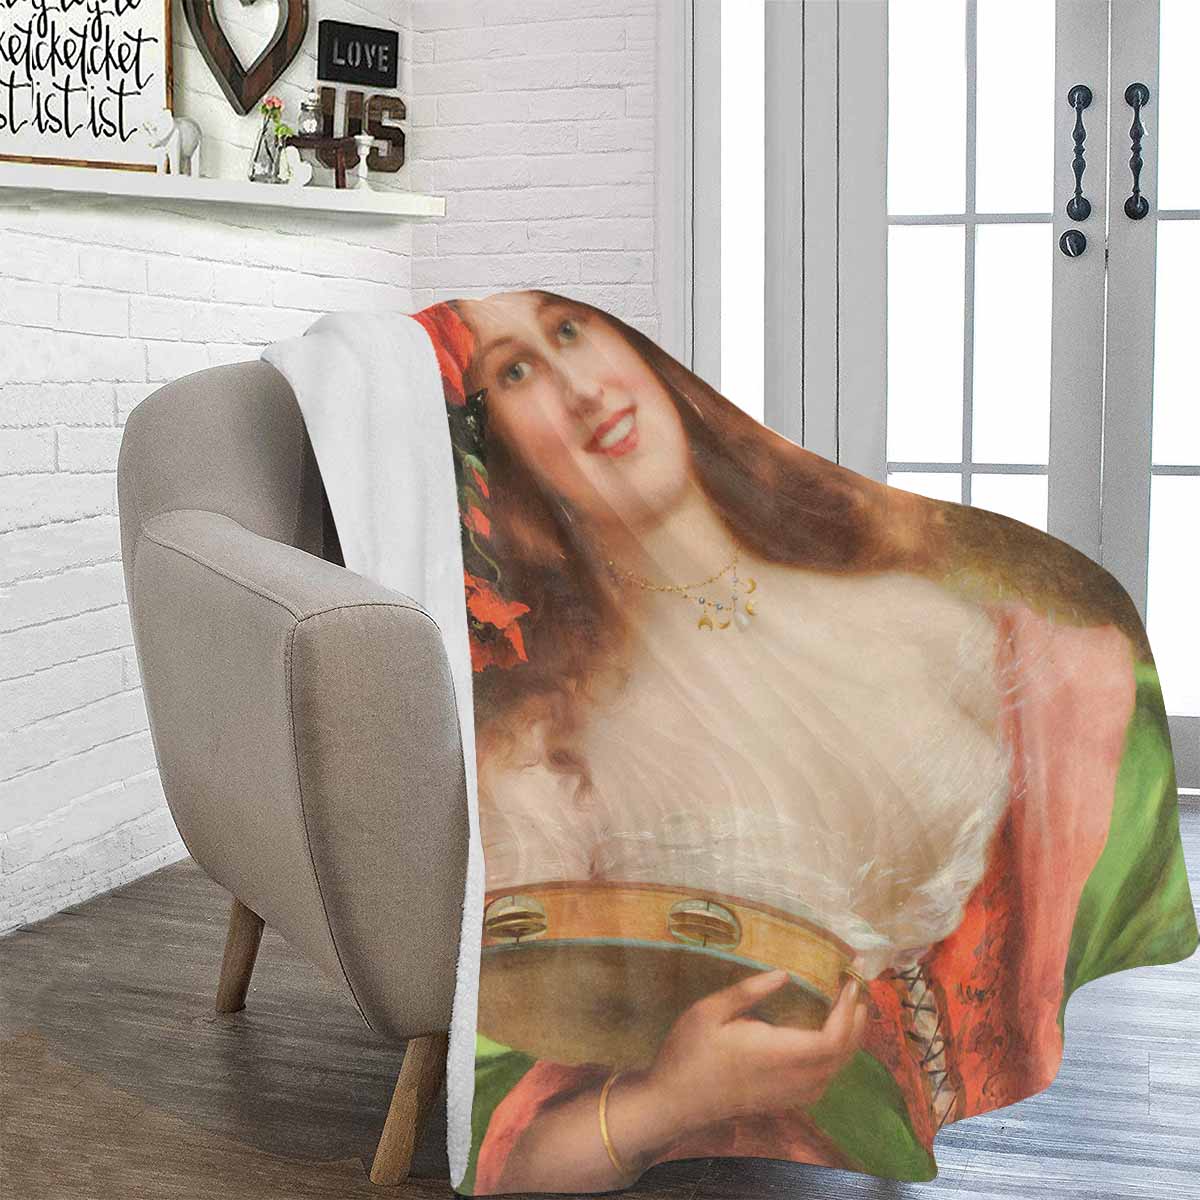 Victorian Lady Design BLANKET, LARGE 60 in x 80 in, Tambourine Girl